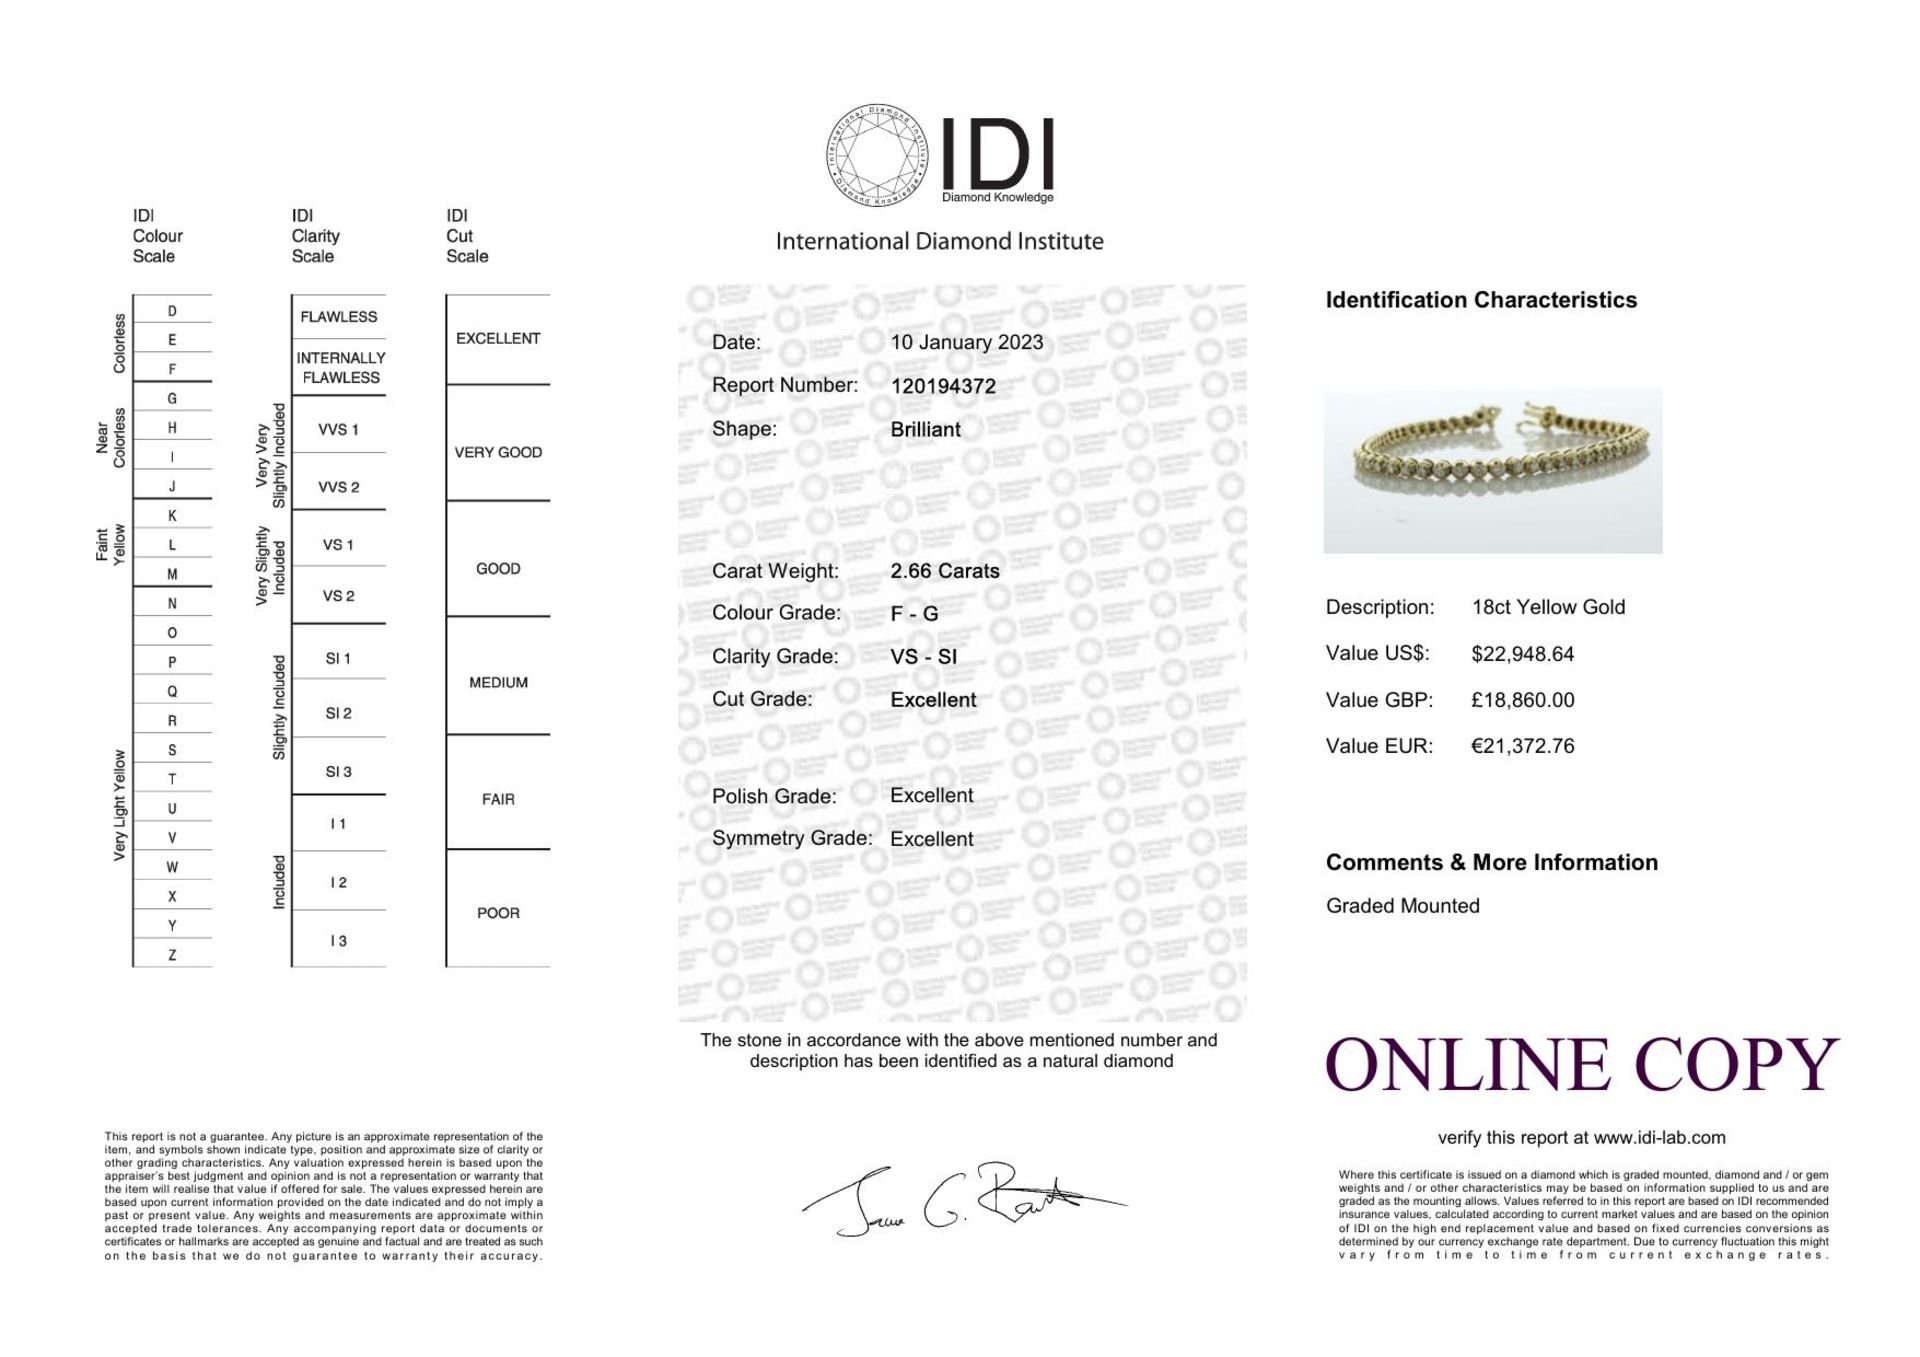 18ct Yellow Gold Tennis Diamond Bracelet 2.66 Carats - Valued By IDI £18,860.00 - Sixty five round - Image 5 of 5